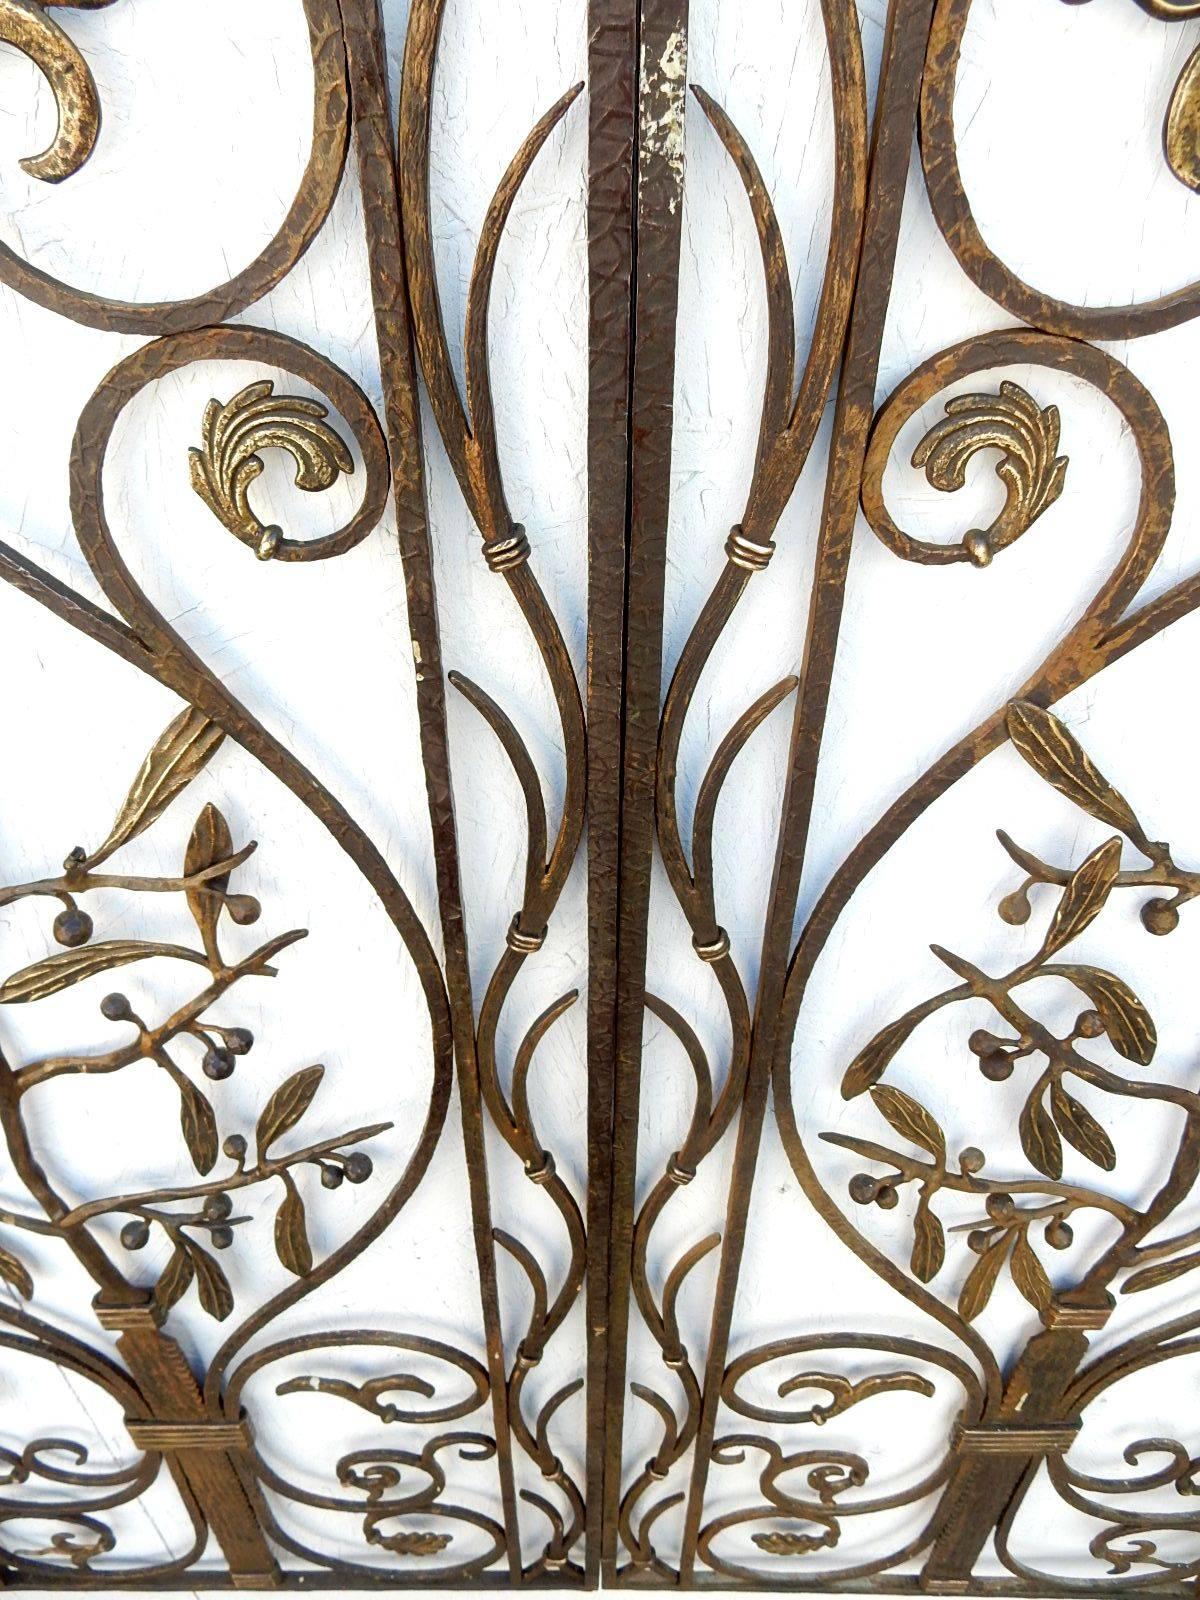 Incredible, early 1900s French artistic iron garden gate with bronze fleur-de-lis, berry bush and florets. 
Maker’s mark stamped on top edge is a two-barred cross (the Cross of Lorraine).